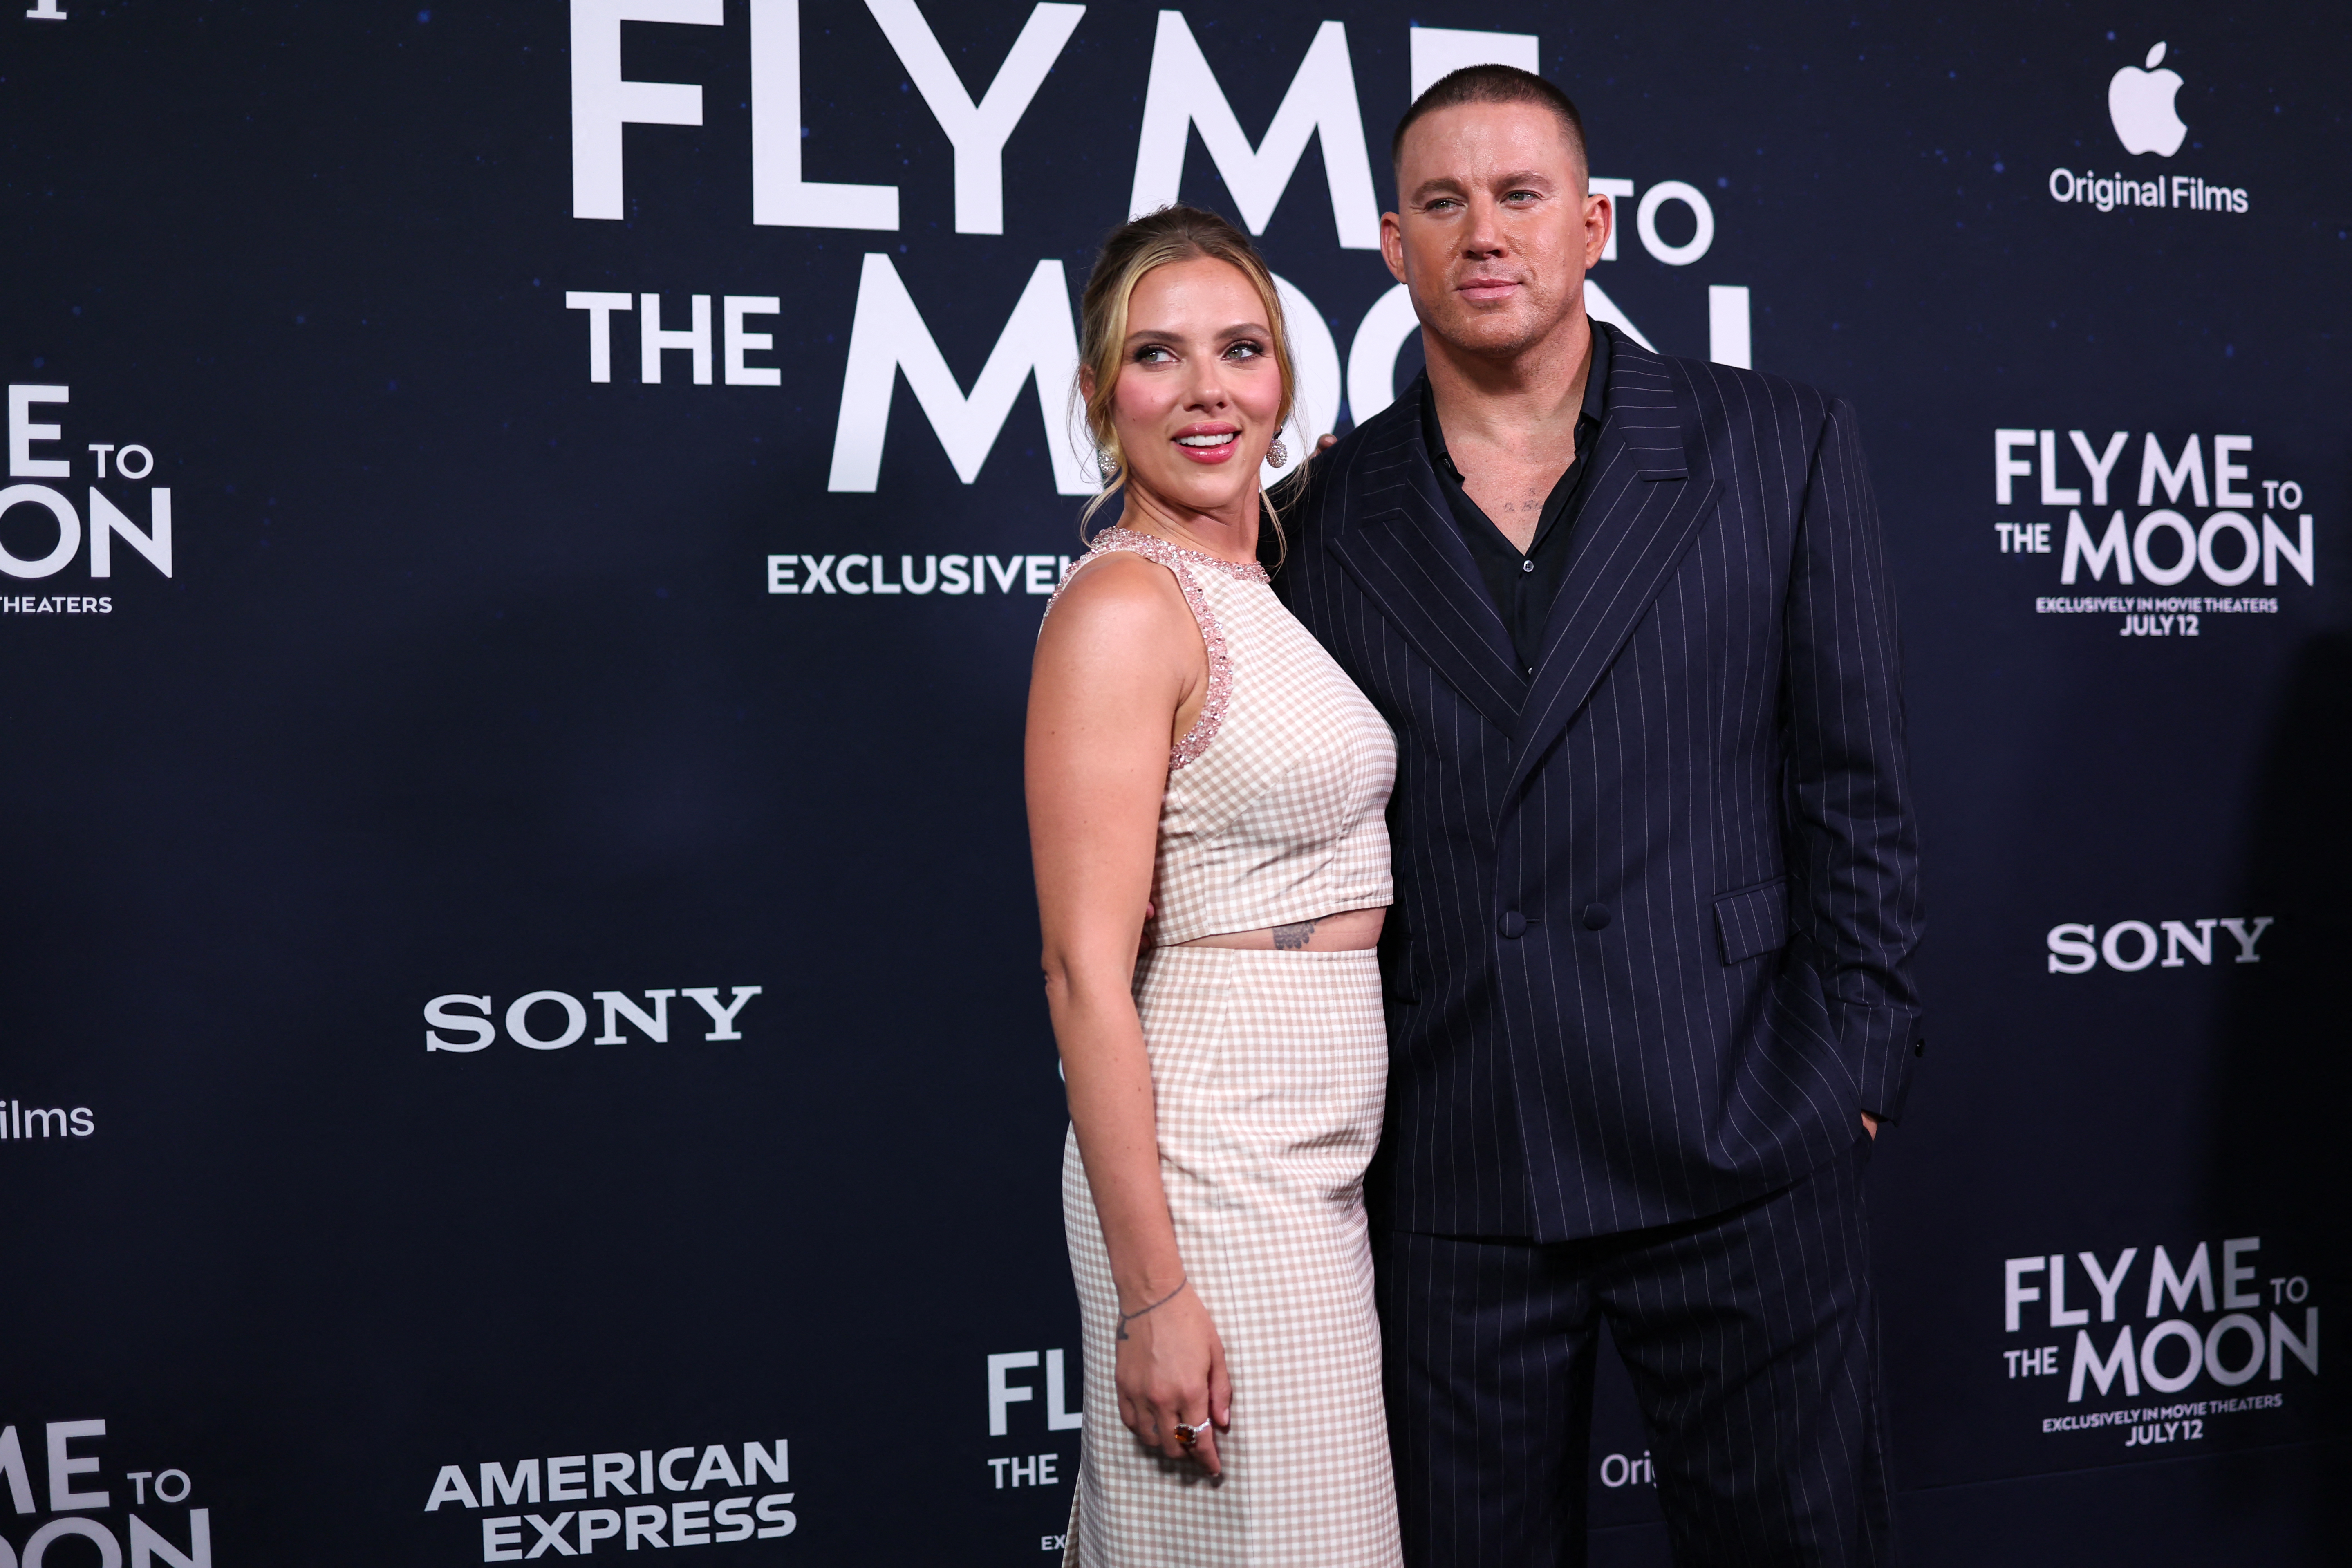 US actress Scarlett Johansson (L) and US actor Channing Tatum attend the world premiere of Apple Original Films' "Fly Me to the Moon" at AMC Lincoln Square in New York on July 8, 2024. (Photo by Charly TRIBALLEAU / AFP) (Photo by CHARLY TRIBALLEAU/AFP via Getty Images)